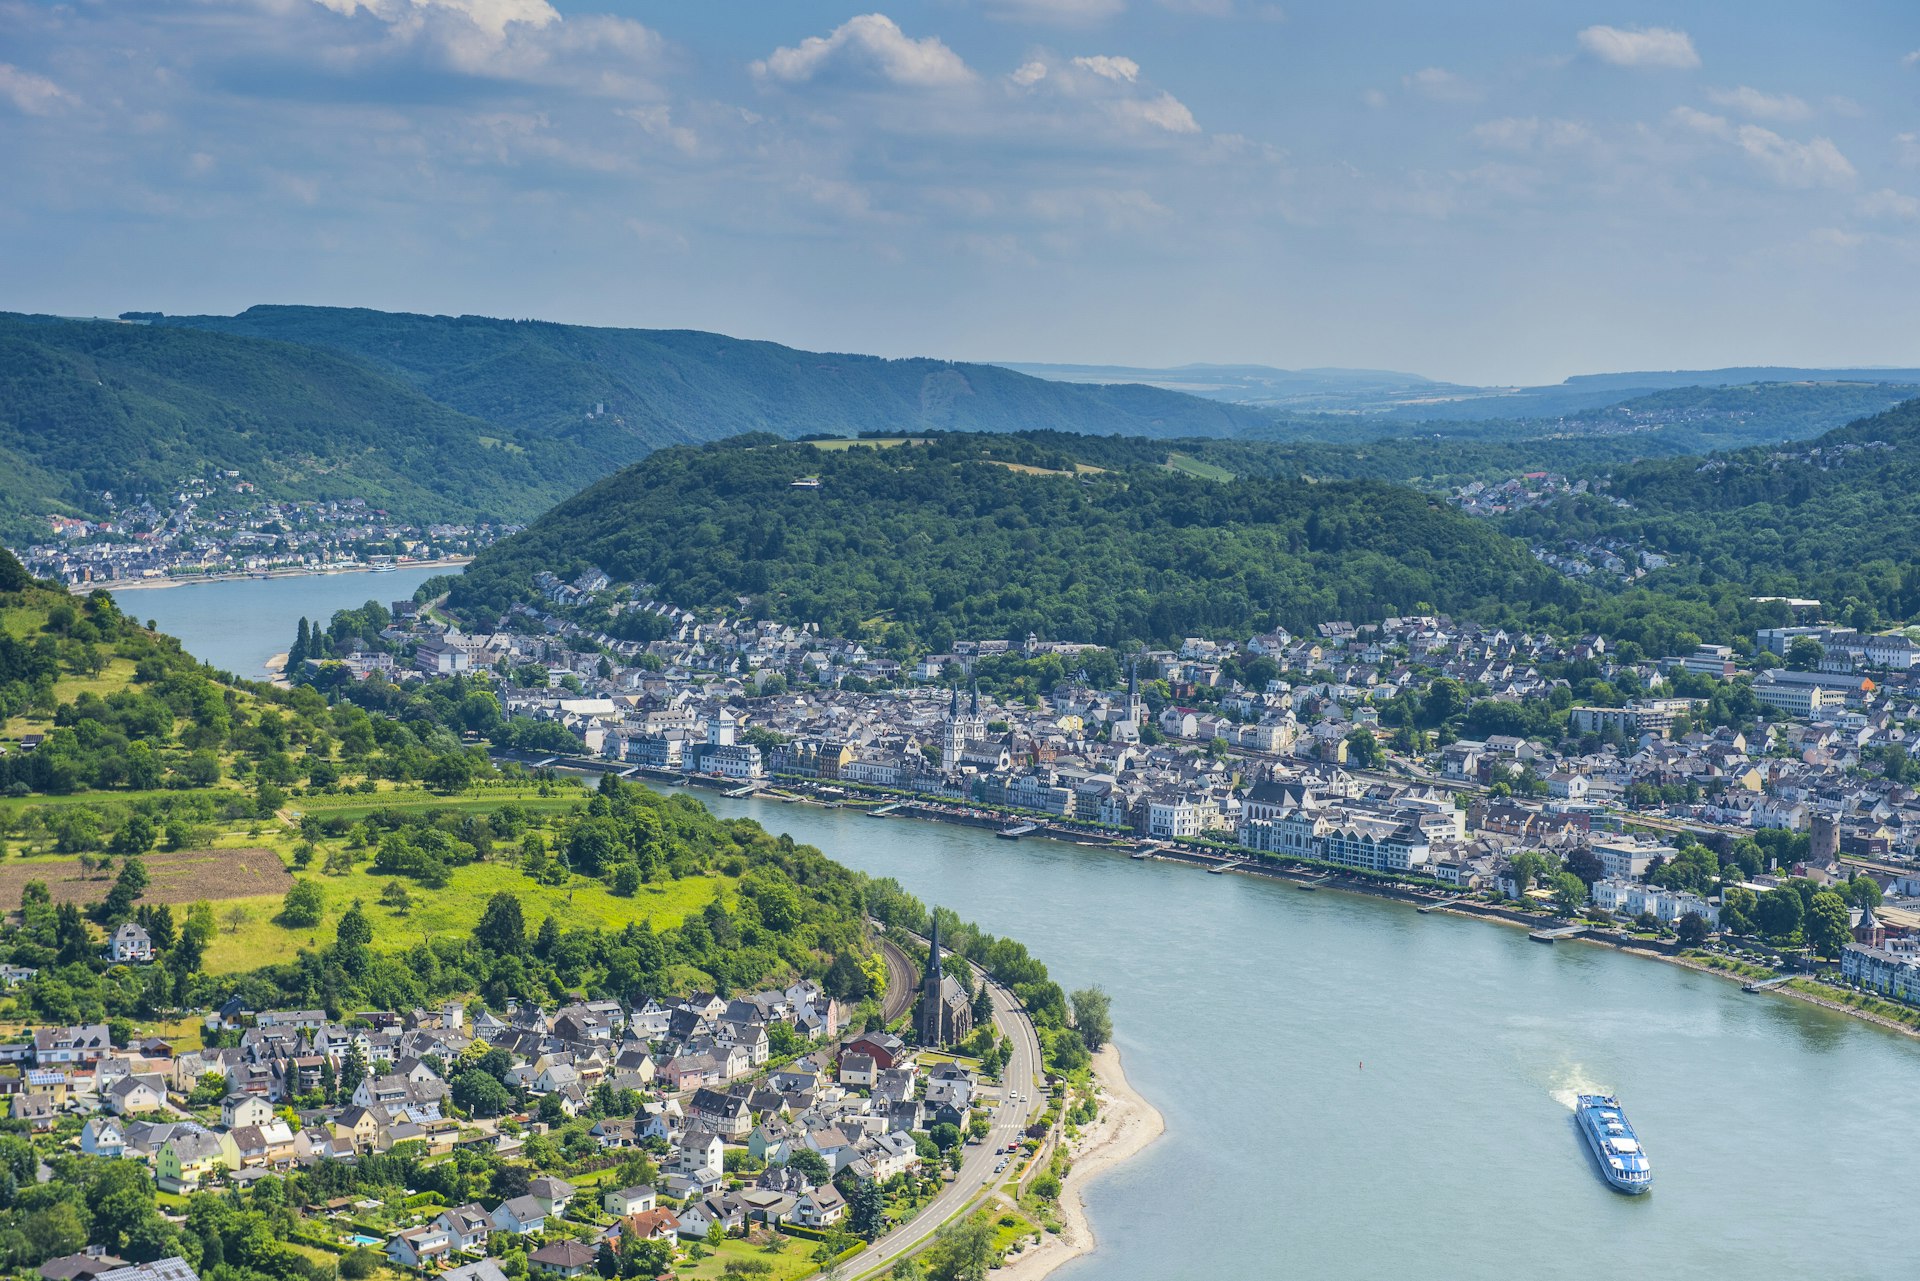 View over Boppard in the Rhine Valley, Germany